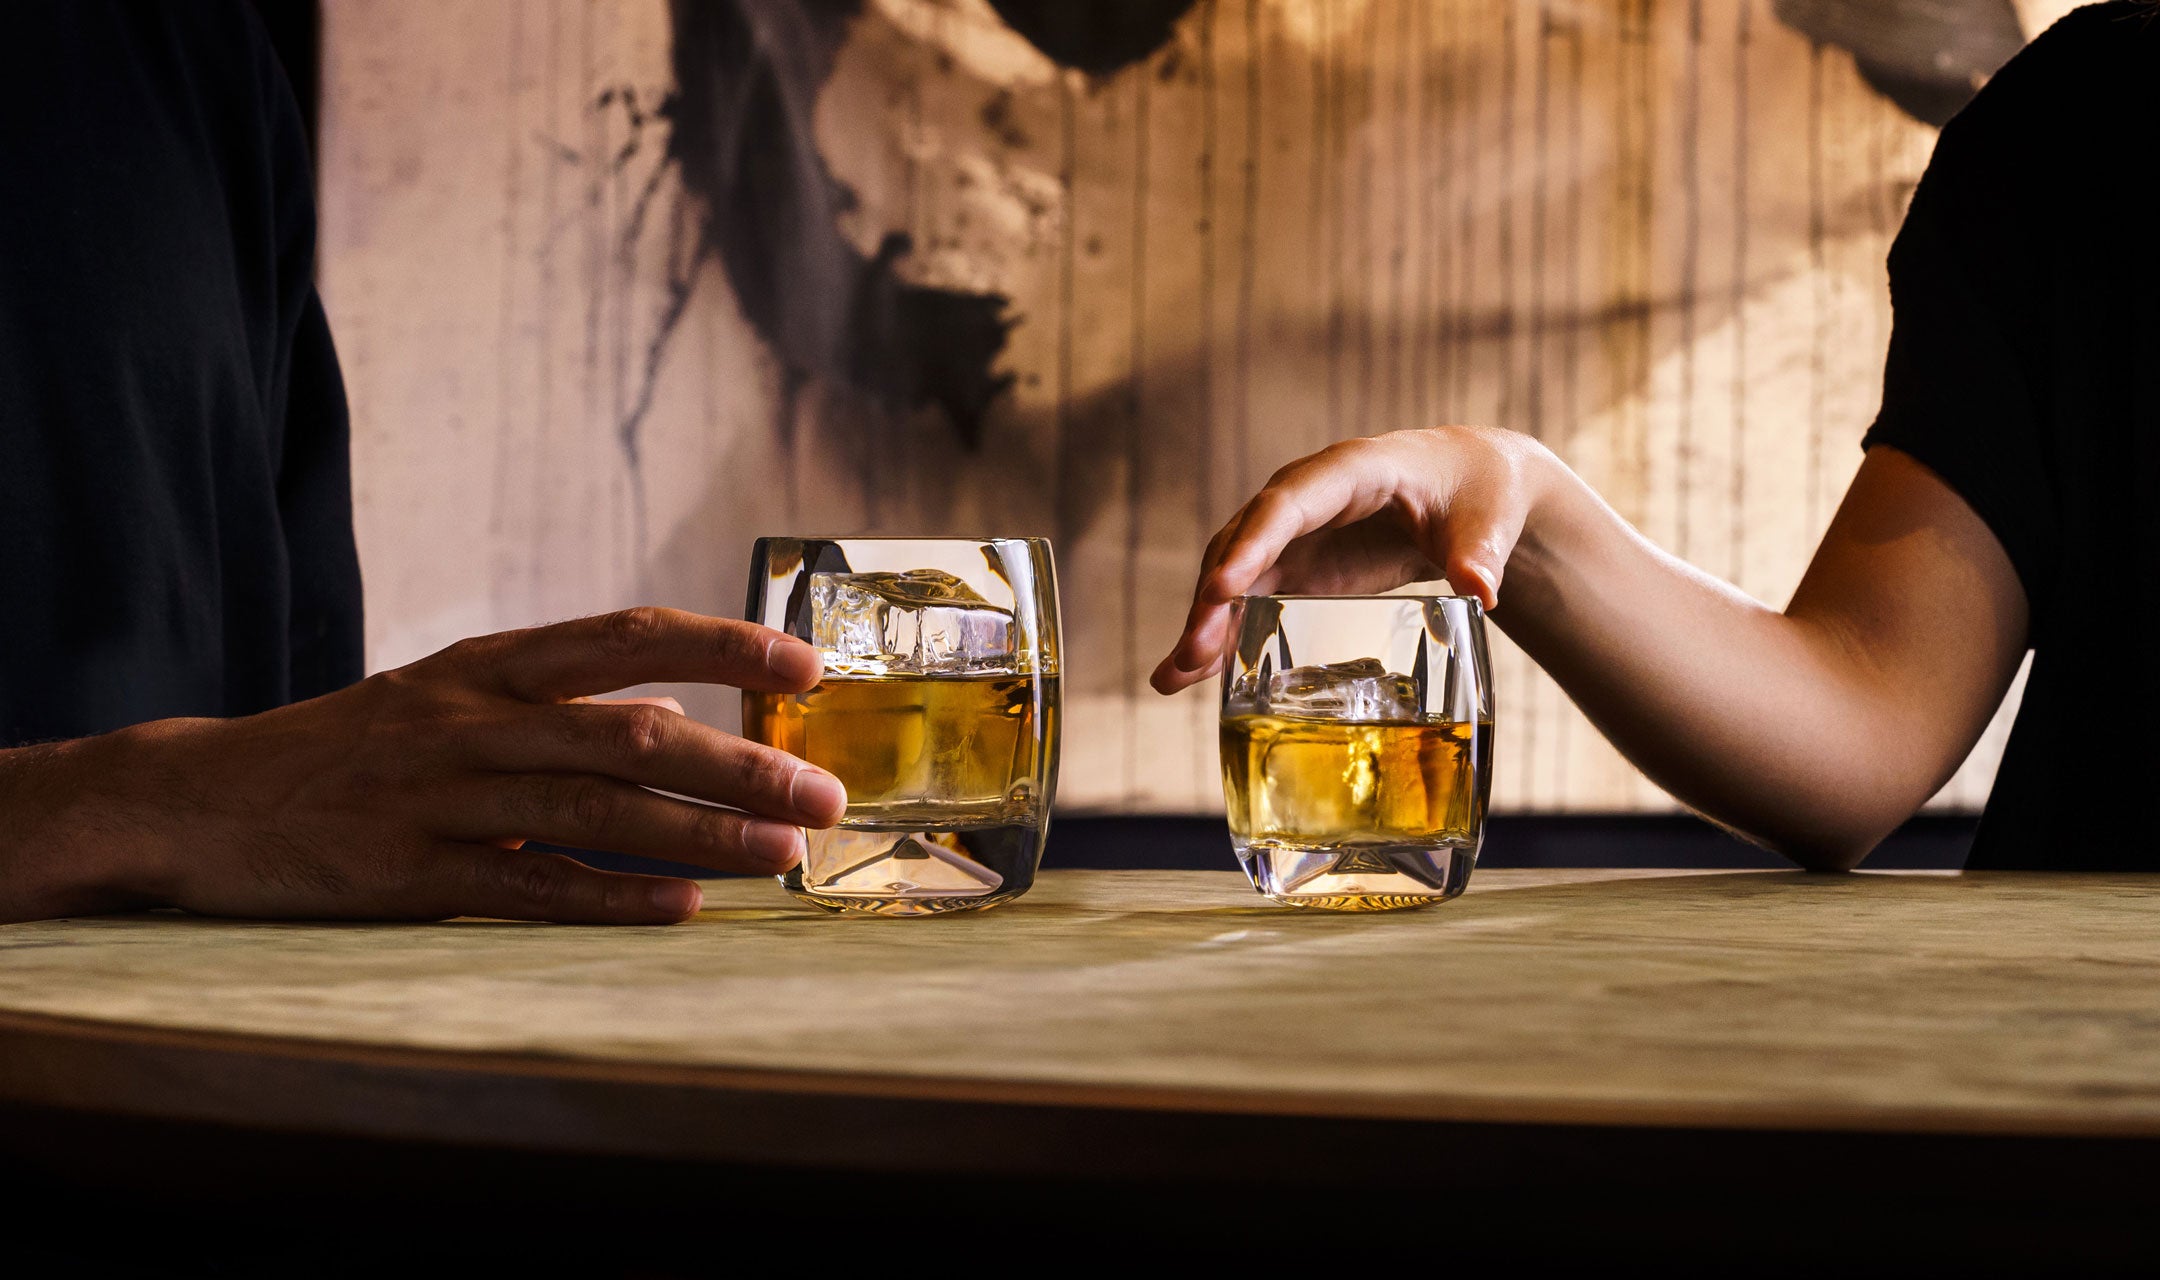 A man and woman are seated at a table. Each is reaching for their Rauk Heavy Tumbler glass. The man has the double old fashioned and the woman has the single old fashioned size. The sizes of the tumblers are therefore easy to see in relation to the hands. 